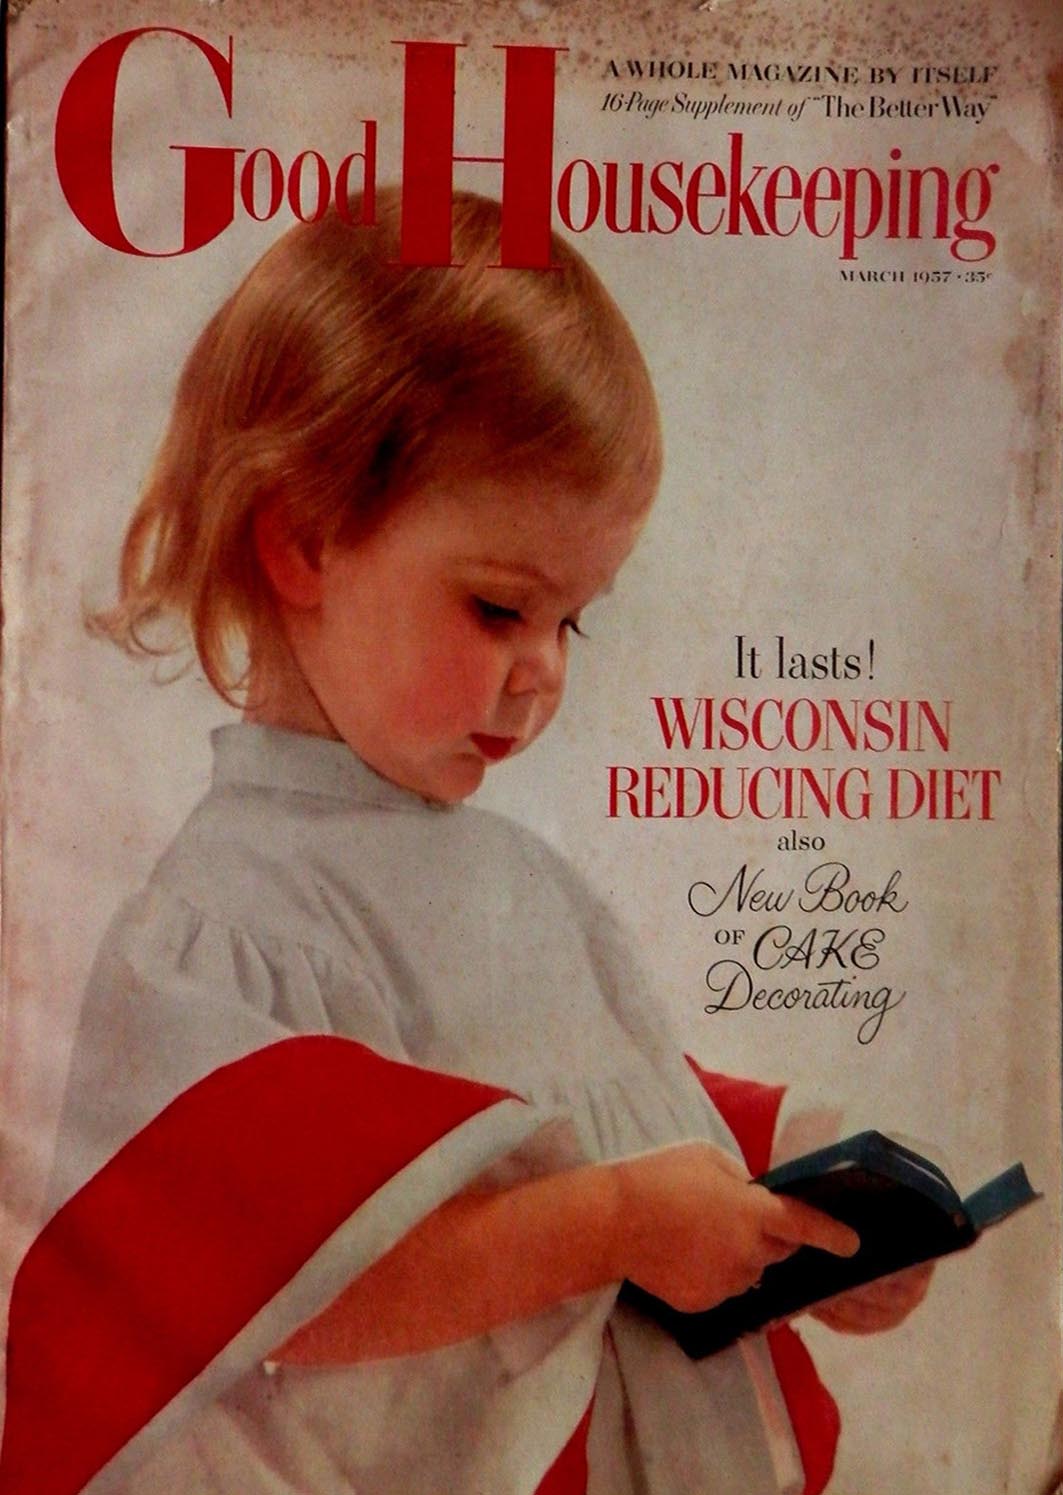 Good Housekeeping March 1957 magazine back issue Good Housekeeping magizine back copy Good Housekeeping March 1957 American womens magazine Back Issue Published by Hearst Publishing Corporation. A Whole Magazine By Itself.